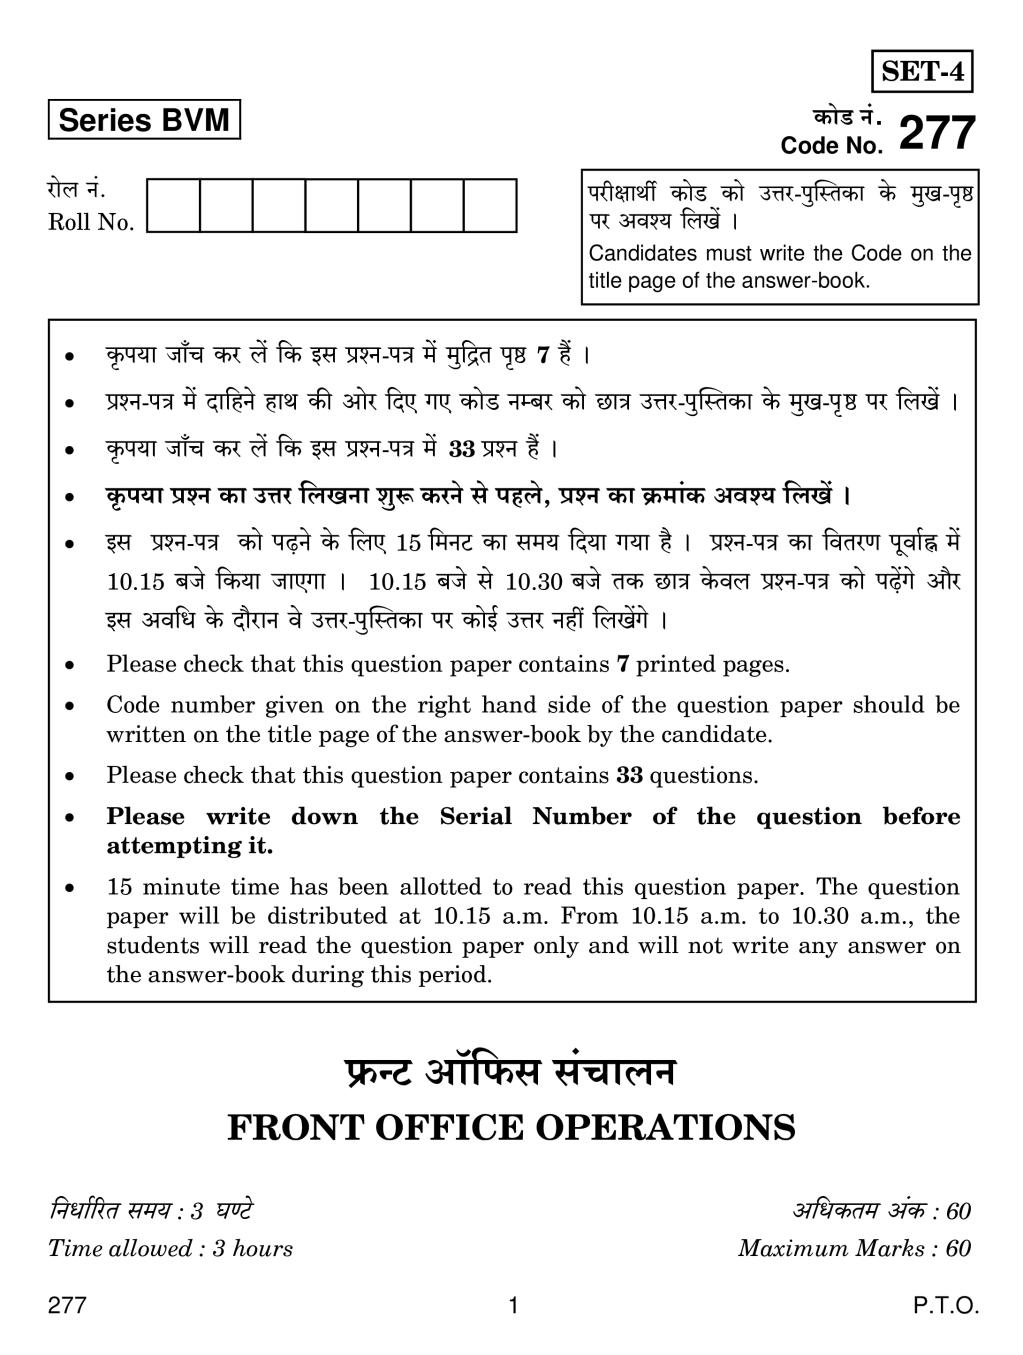 CBSE Class 12 Front Office Operations Question Paper 2019 - Page 1